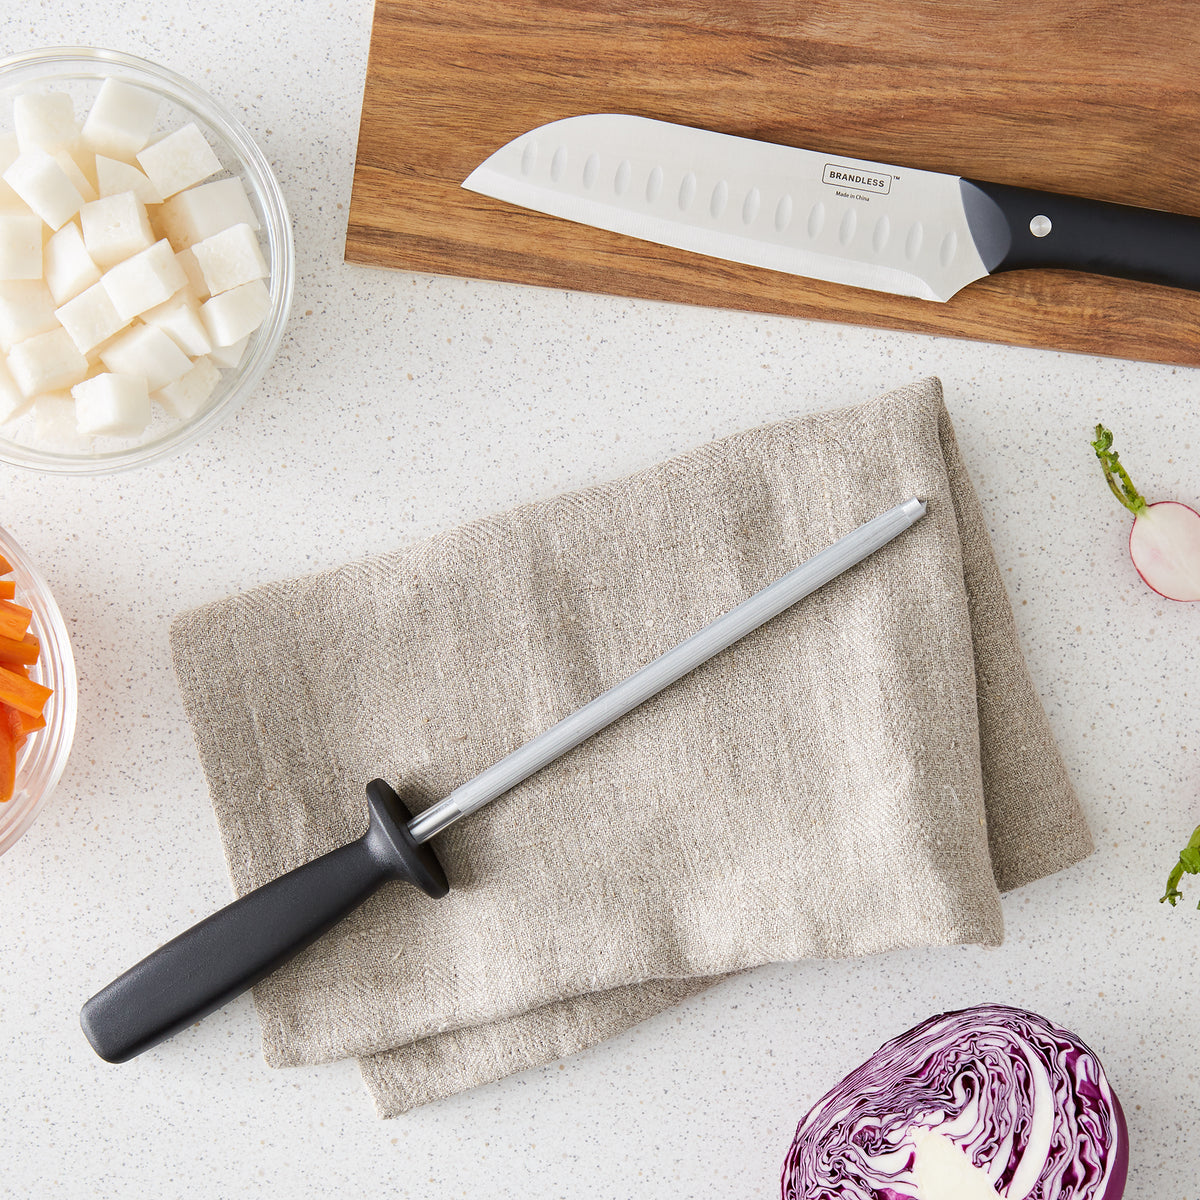 Lifestyle photo, honing steel laying on a dishcloth on a counter next to diced and sliced veggies and a santoku knife.